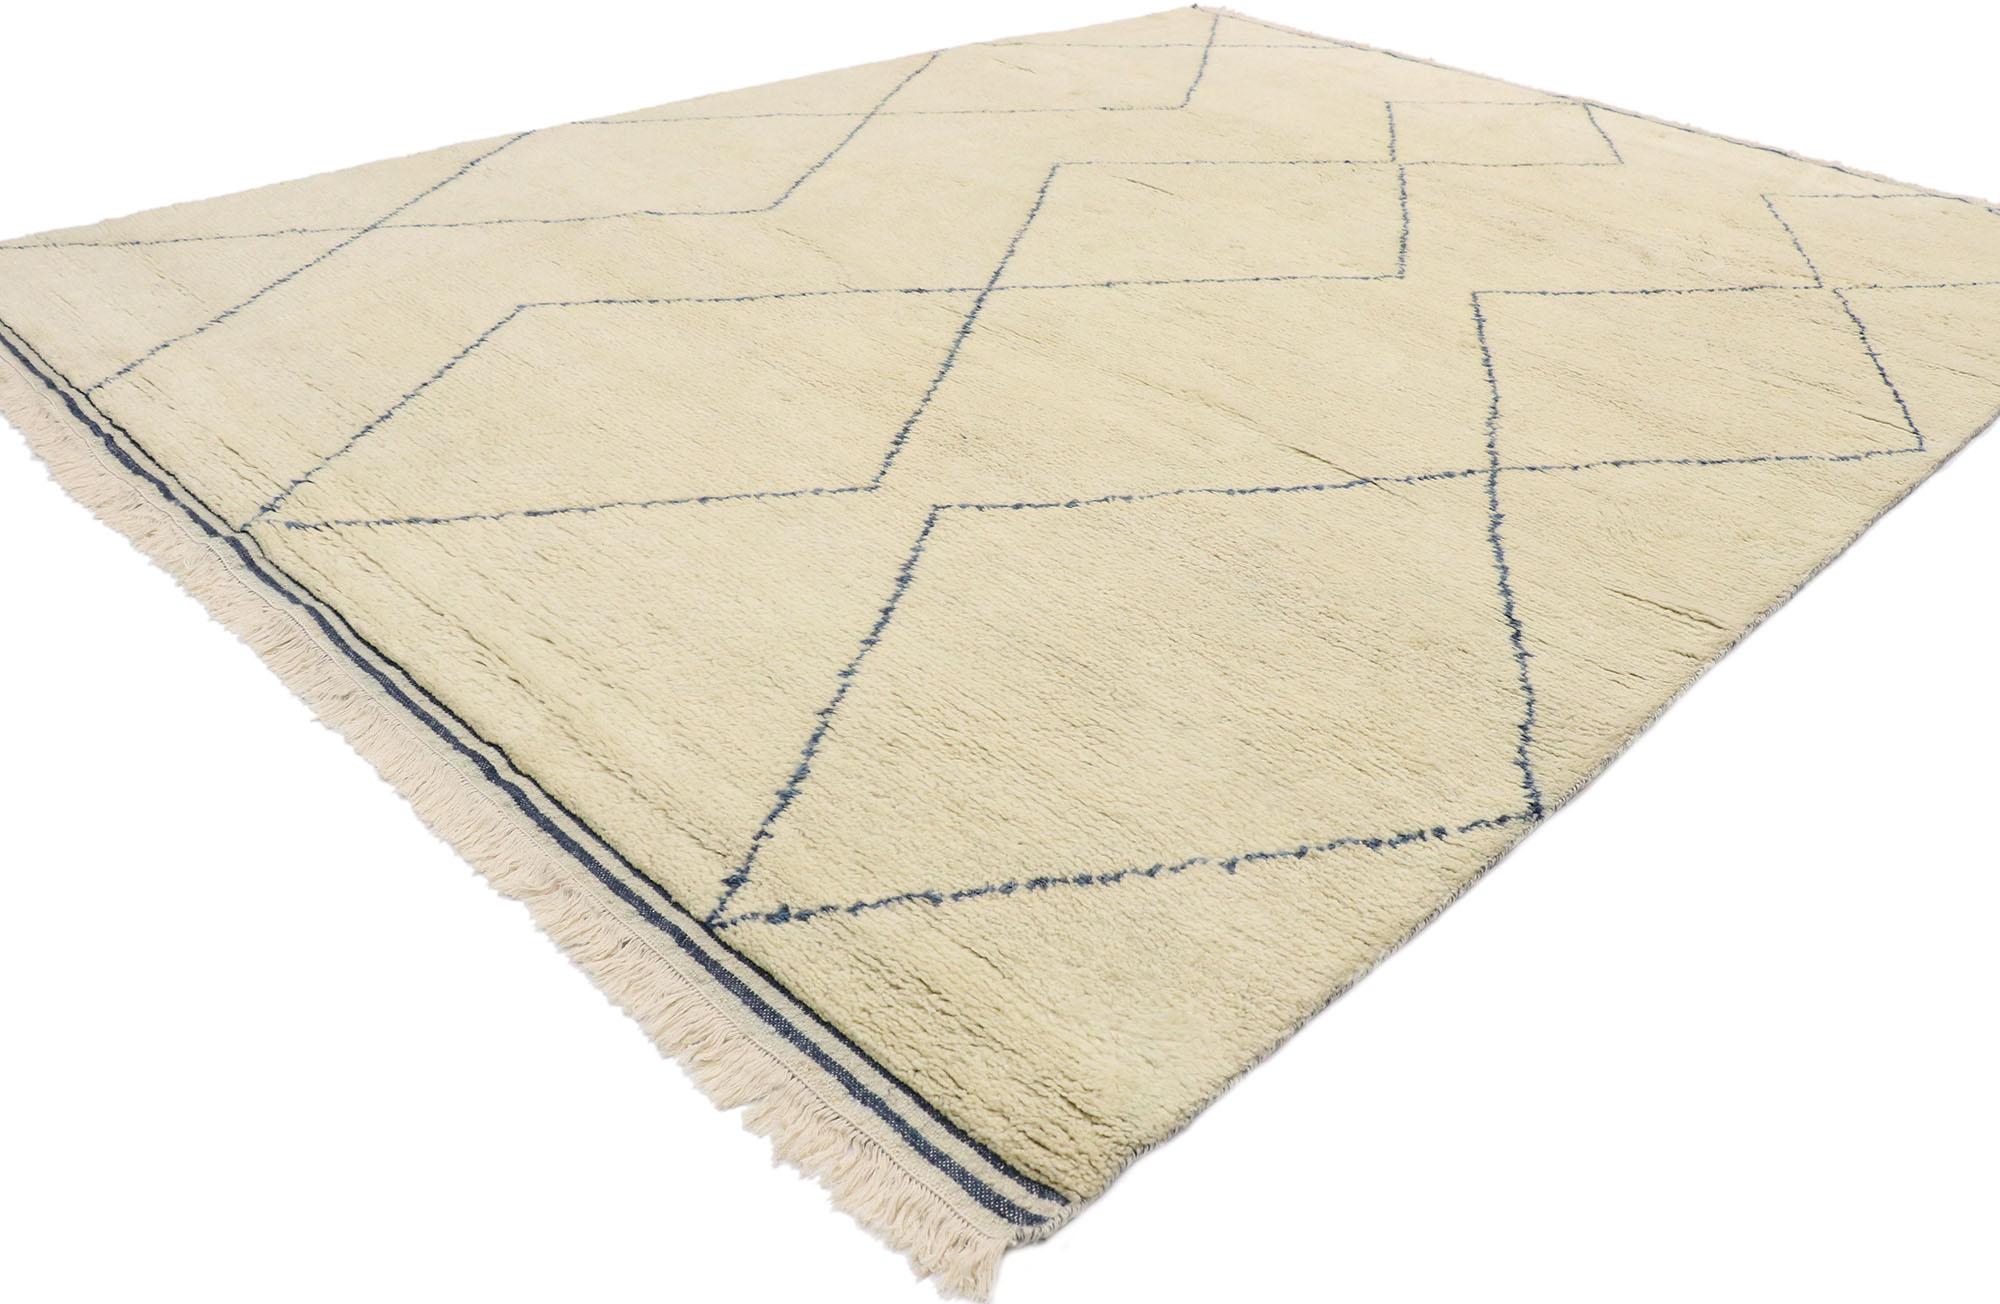 30545 Mid-Century Modern Moroccan Style Rug, 09'03 x 12'00. This hand knotted wool contemporary Moroccan area rug features three columns of diamond lattices unfolding across the sides of an abrashed creamy-beige field. The bluish colored zigzag